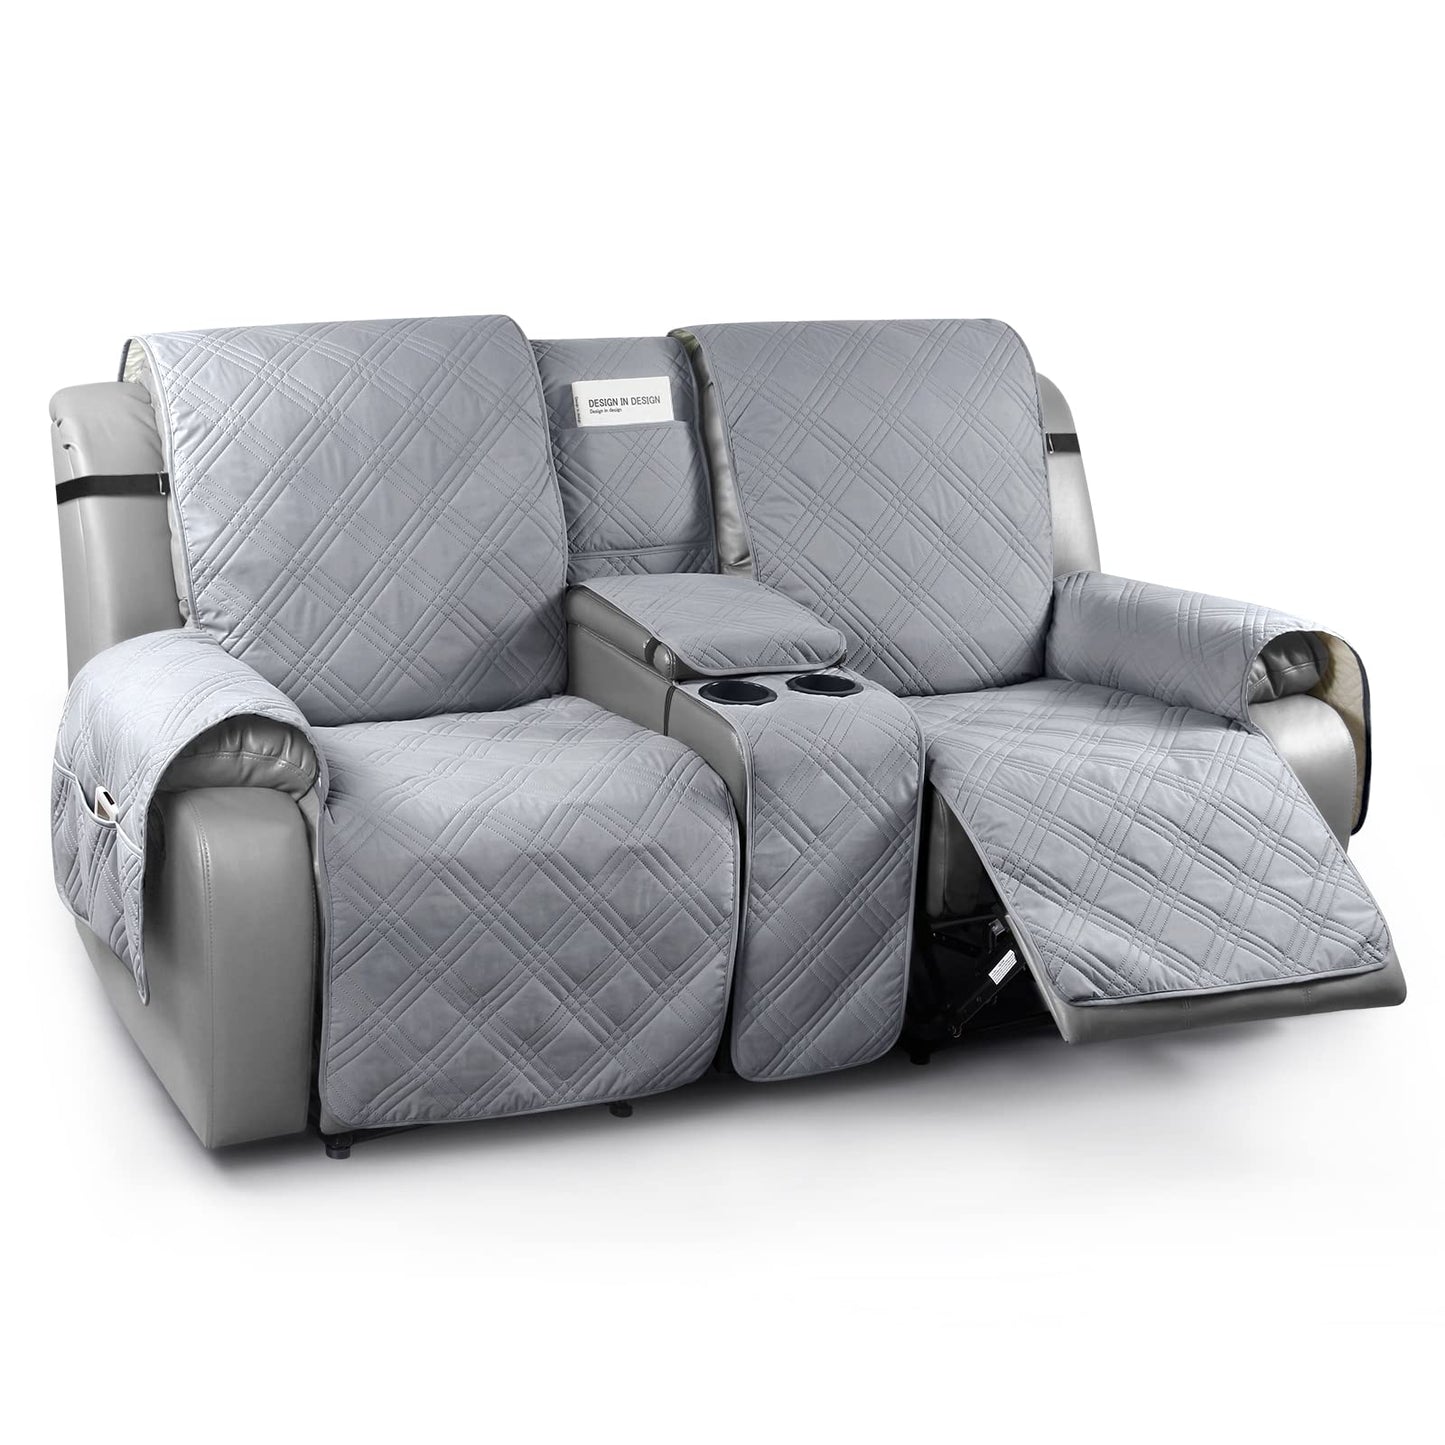 Loveseat Recliner Cover with Center Console (2 Seater) - TAOCOCO